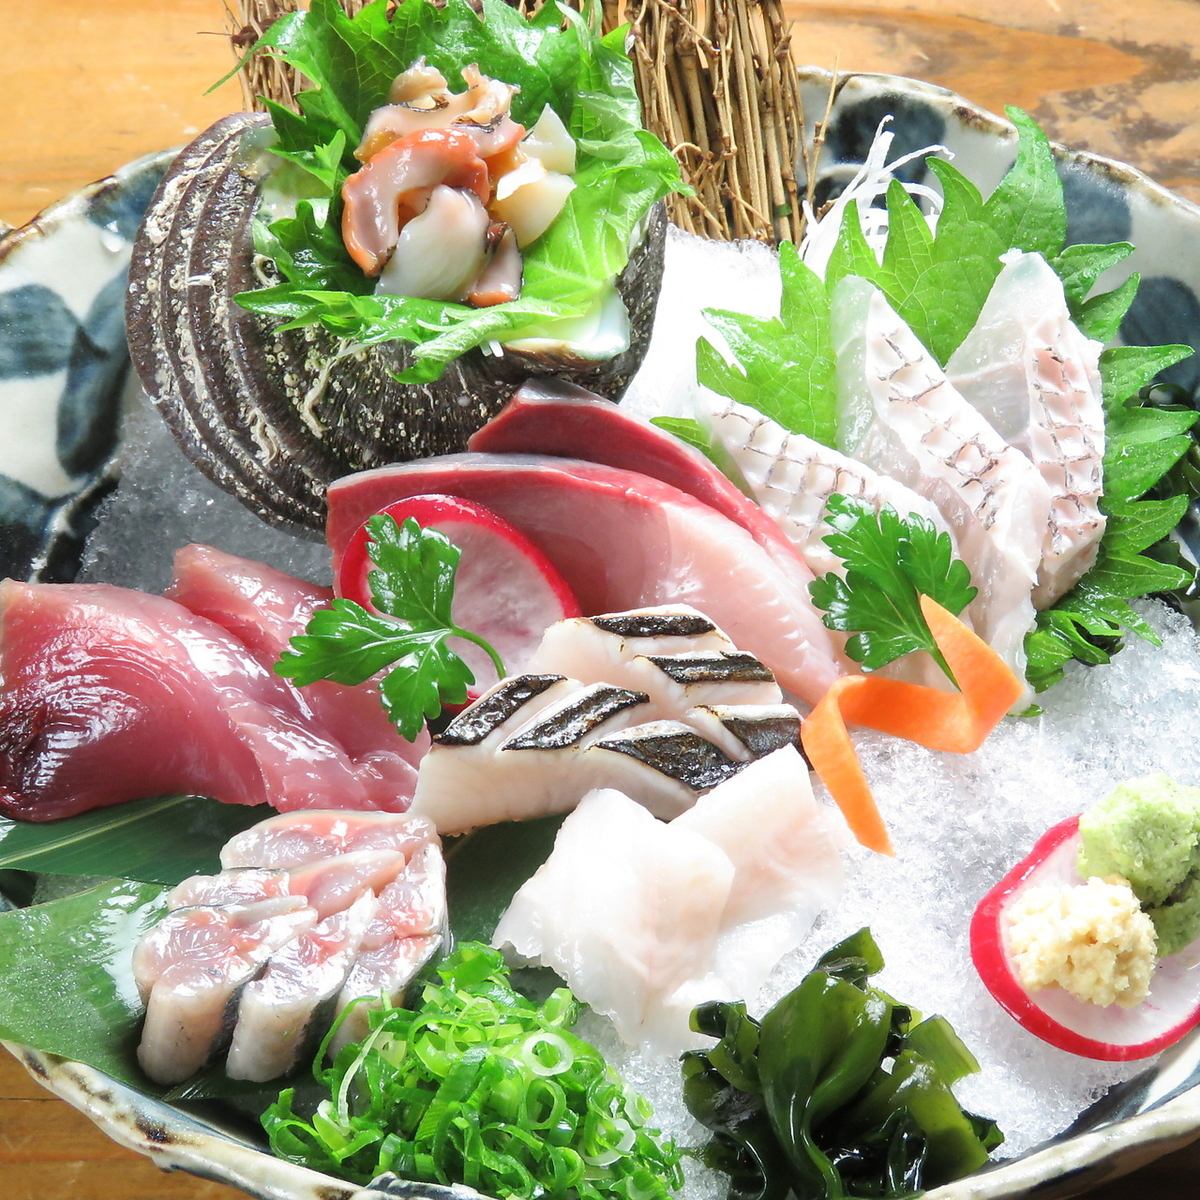 The seafood dishes made with fresh fish purchased every morning are exquisite!